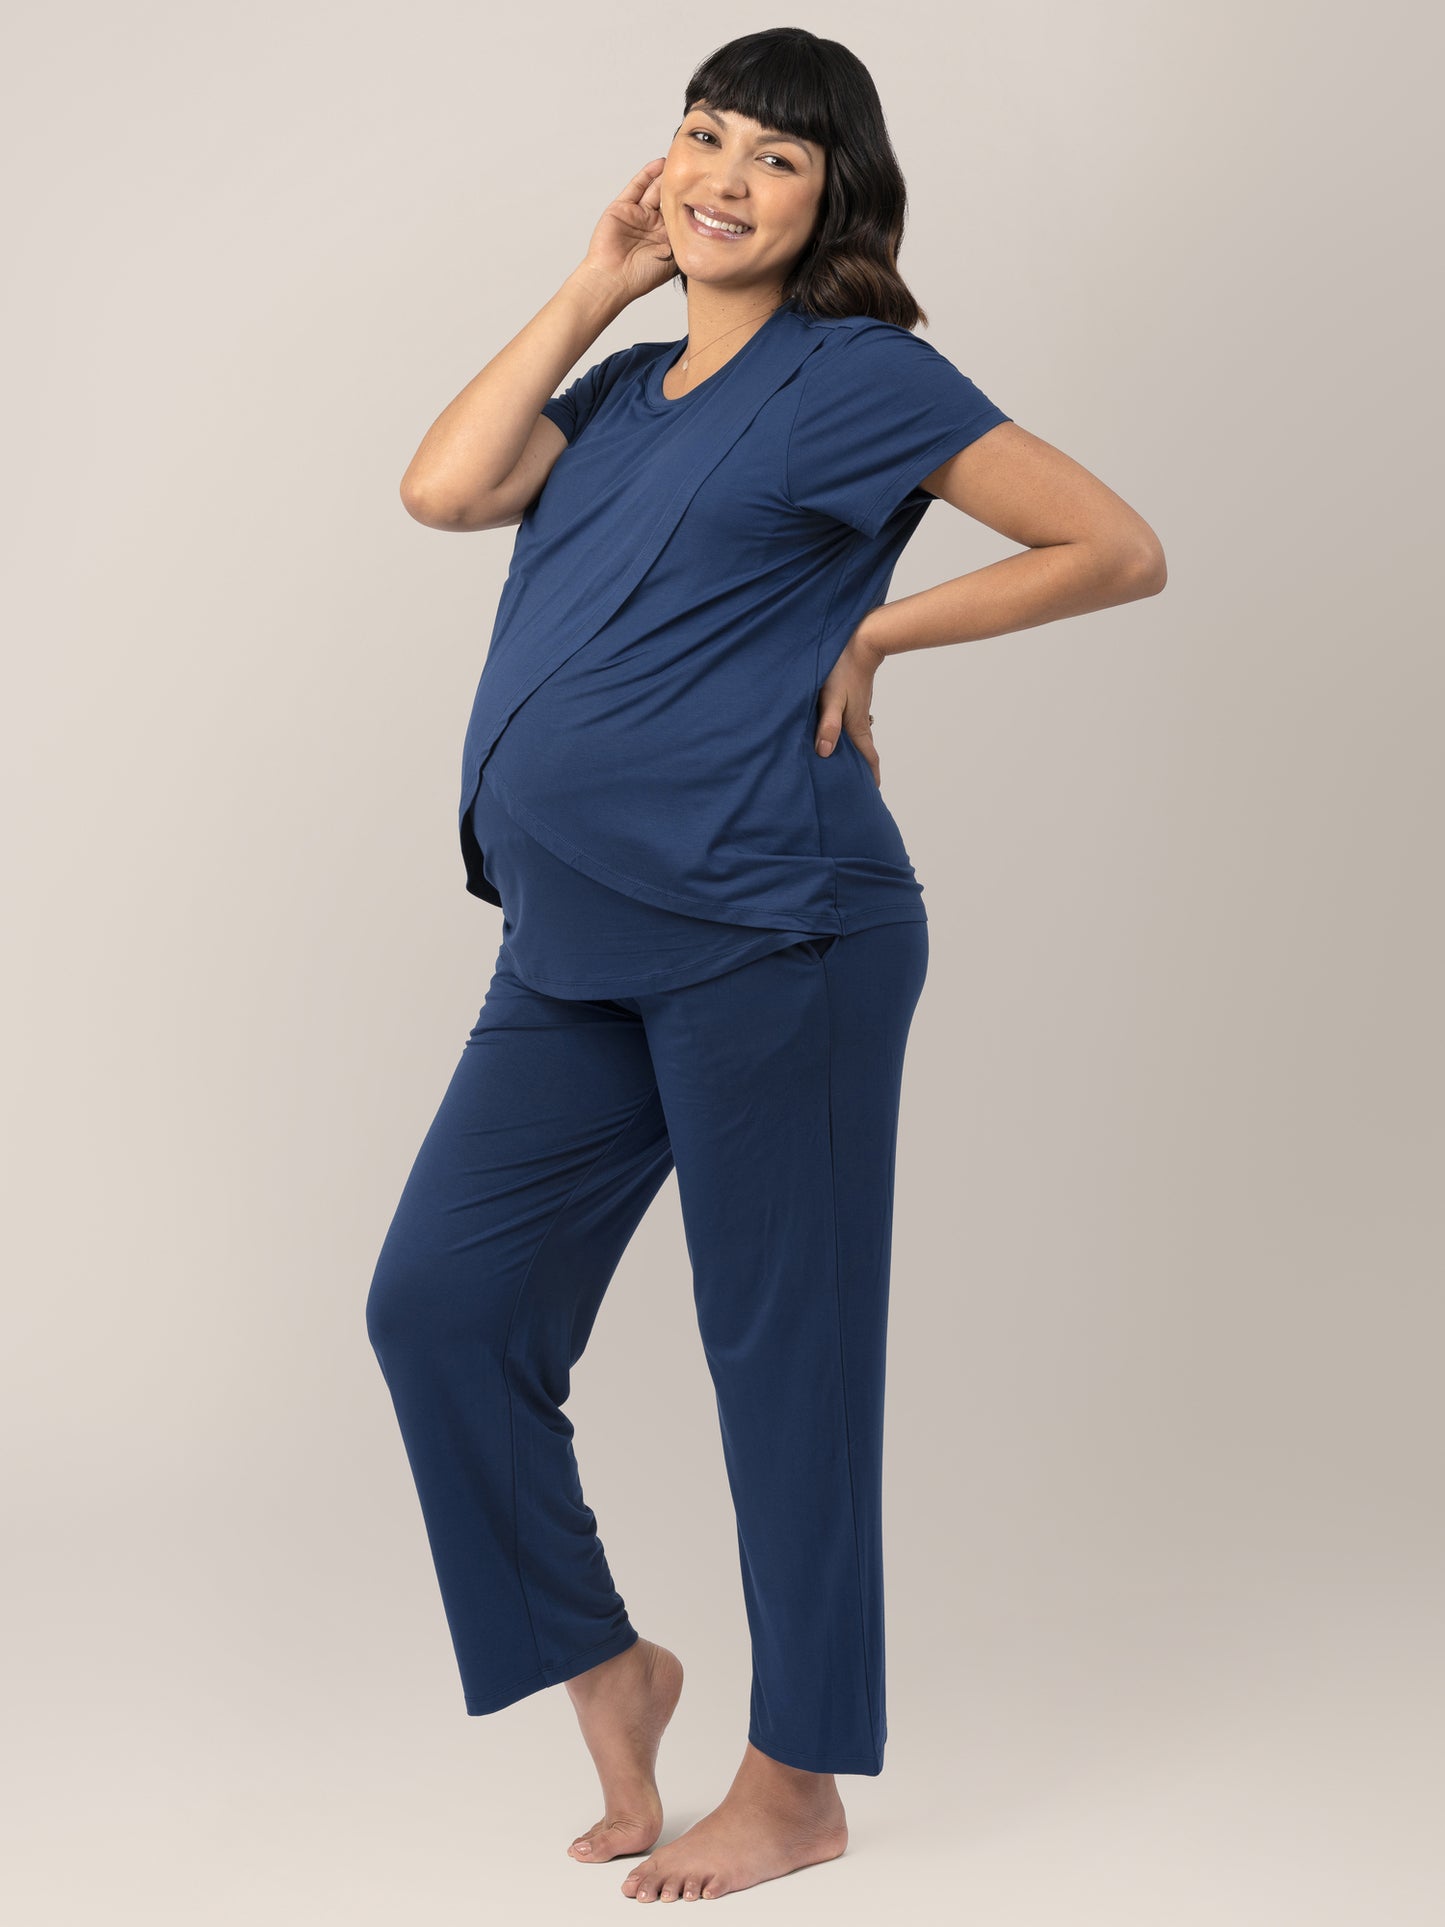 Pregnant Model wearing the Tulip Hem Maternity and Nursing Pajama Set in Navy. Side view showing her bump.